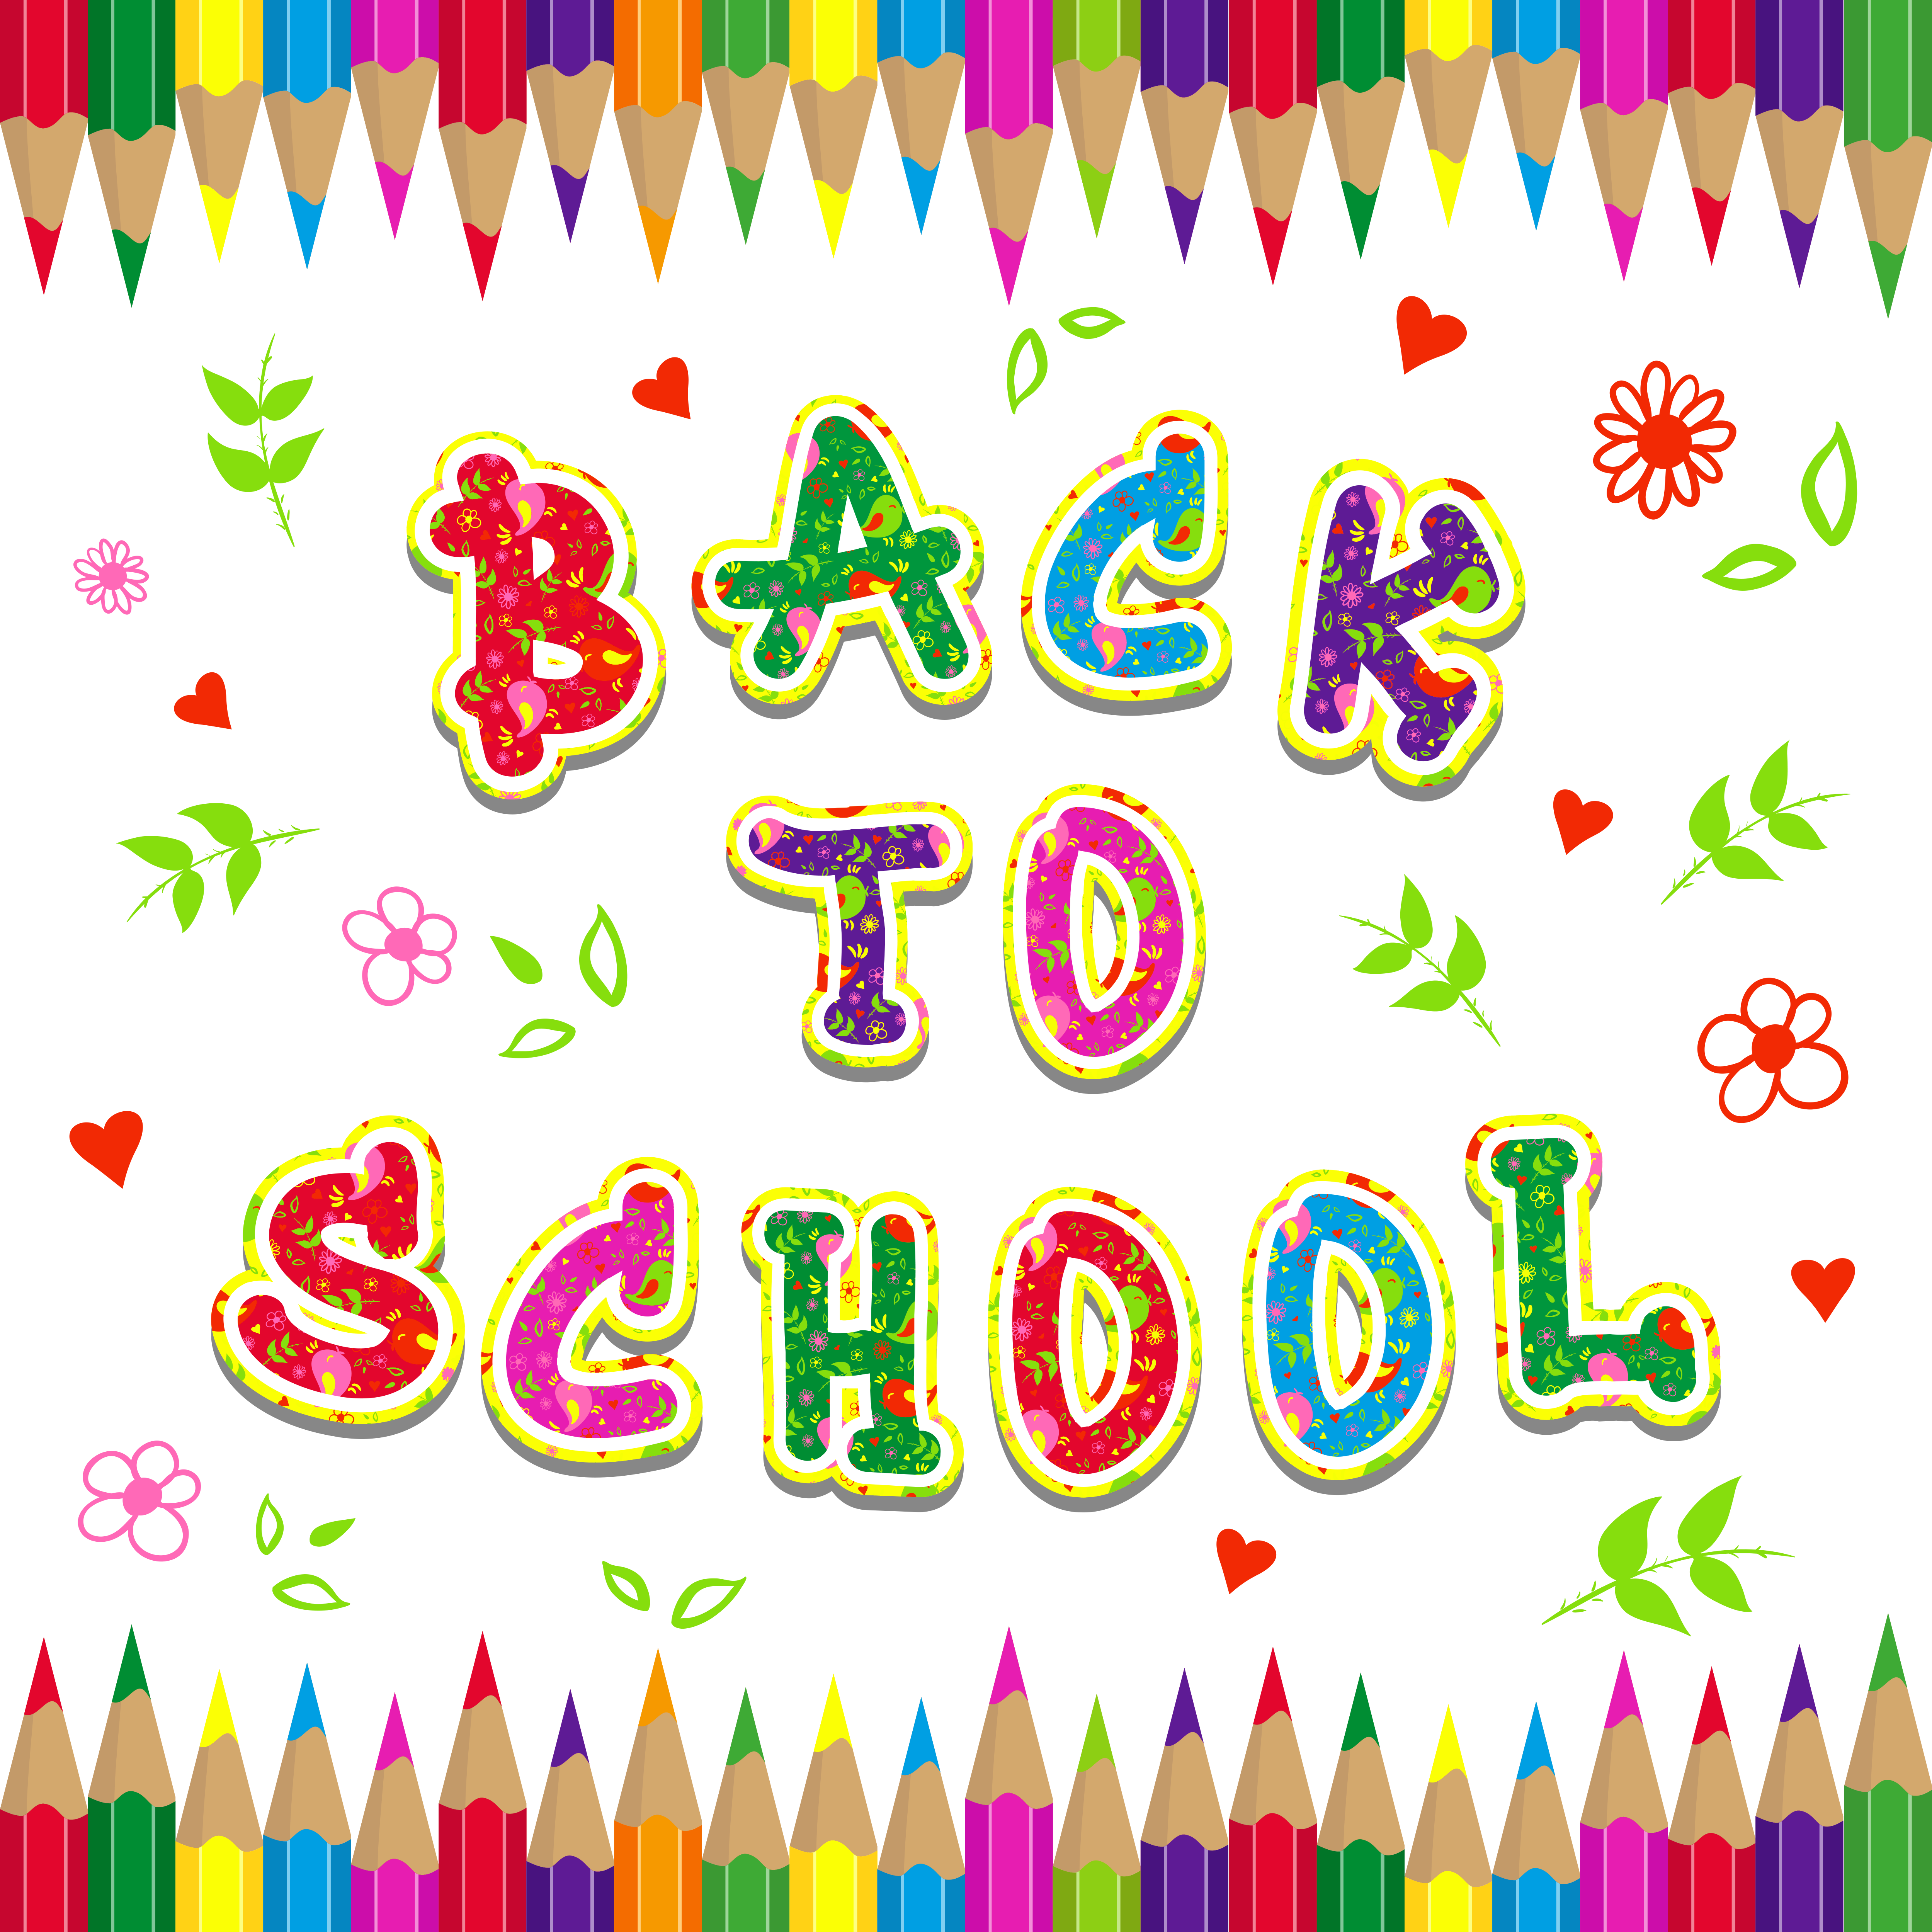 kids clipart back to school